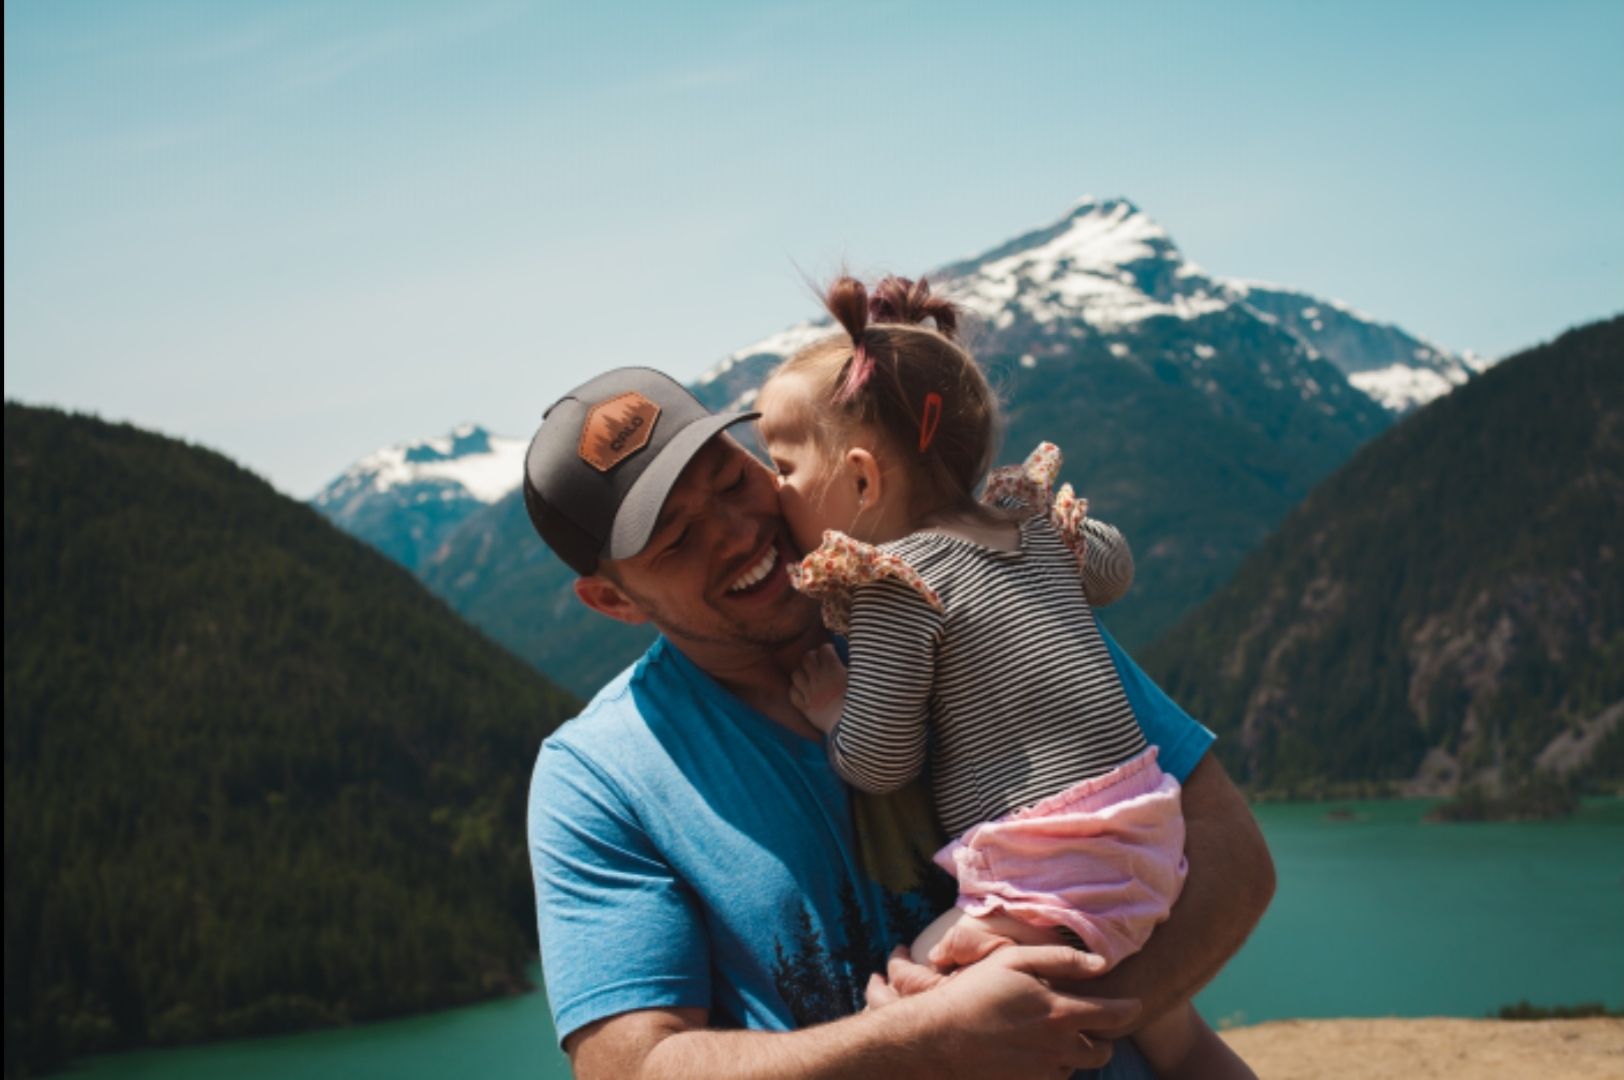 Photo by Josh Willink: https://www.pexels.com/photo/man-carrying-her-daughter-smiling-1157395/